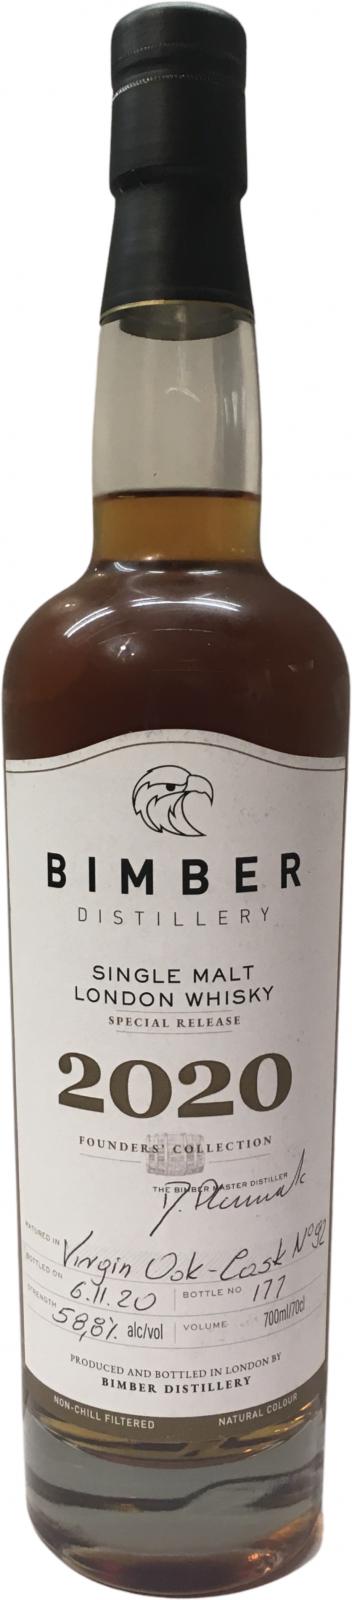 Bimber Founders’ Collection